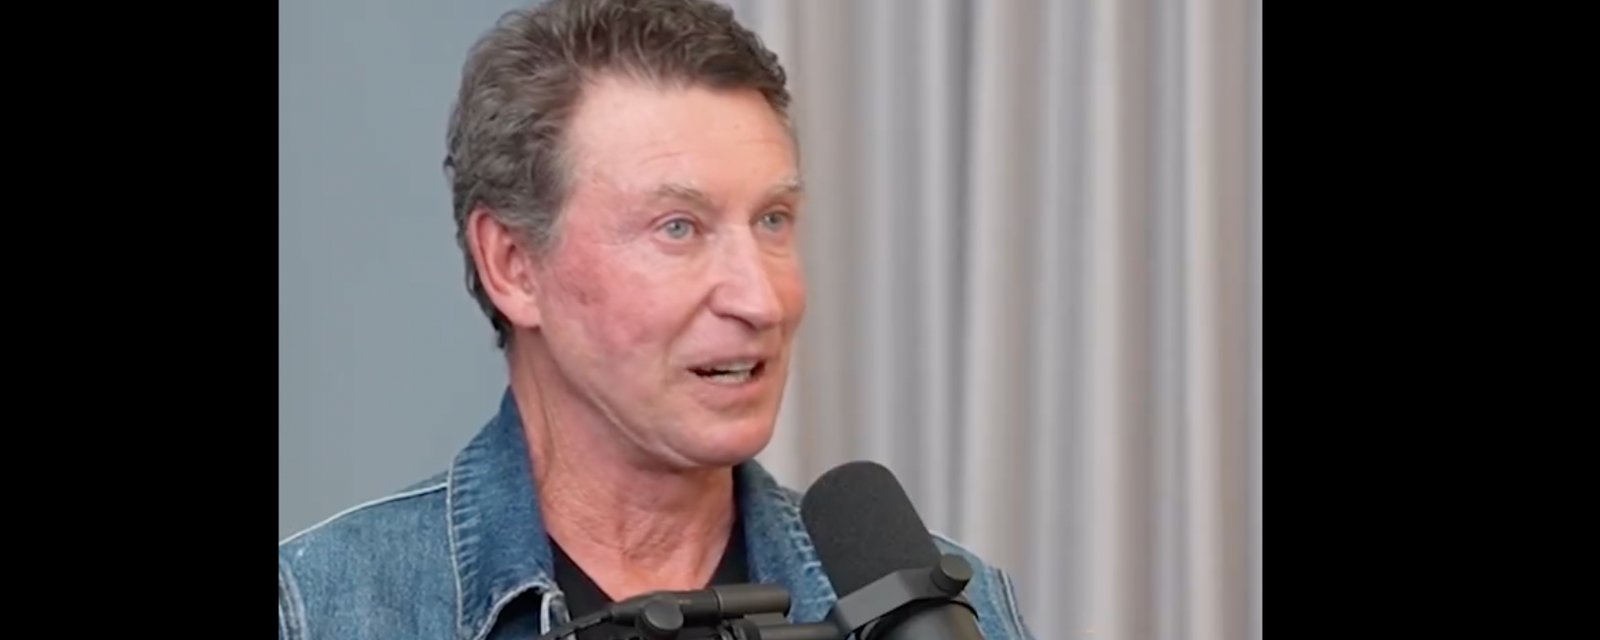 Wayne Gretzky reveals “worst thing that ever happened” out of his trade from Edmonton